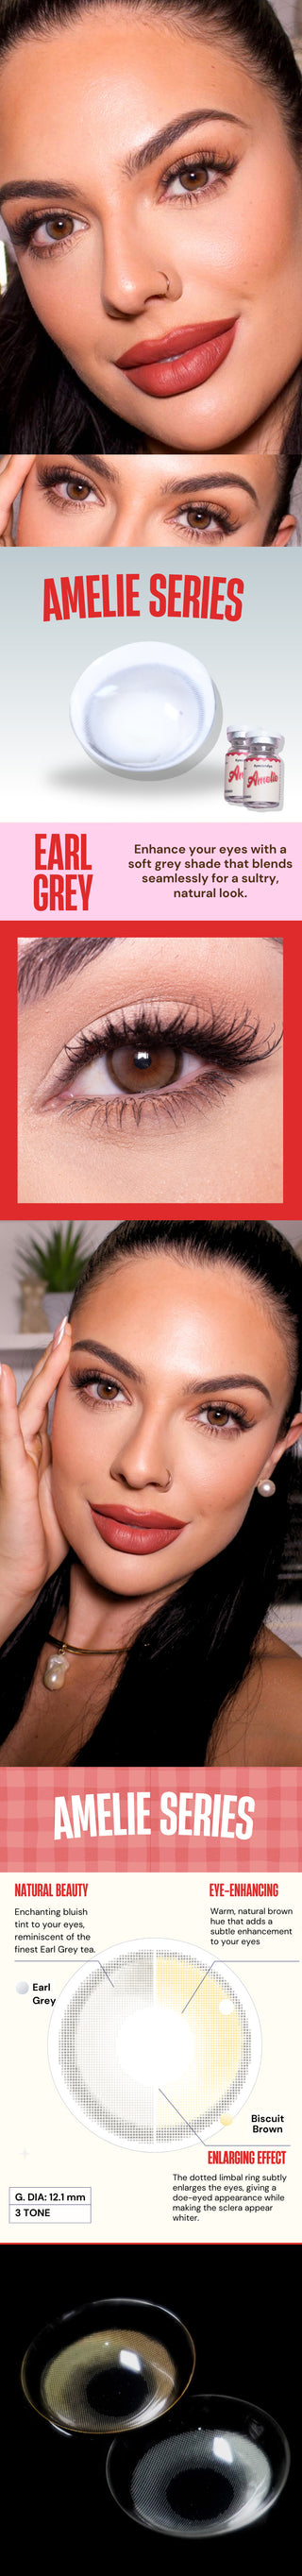 a collage of model image with a natural dark brown eyes wearing the amelie series earl grey  and a close up eye image and another close up image of the contact lens showing the detail of the same lens.